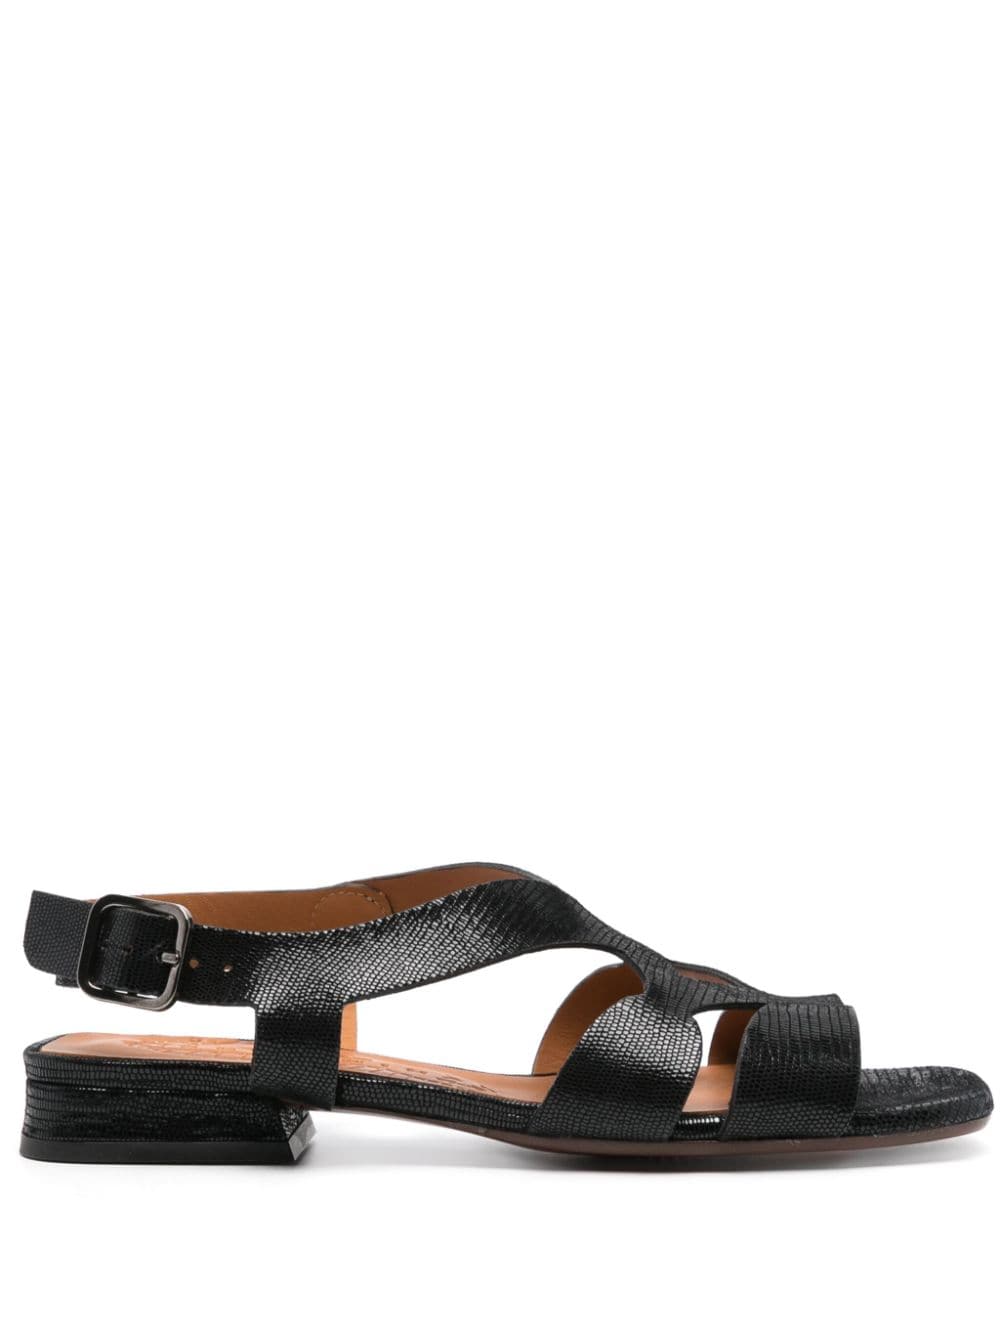 Chie Mihara Taini Leather Sandals - Farfetch